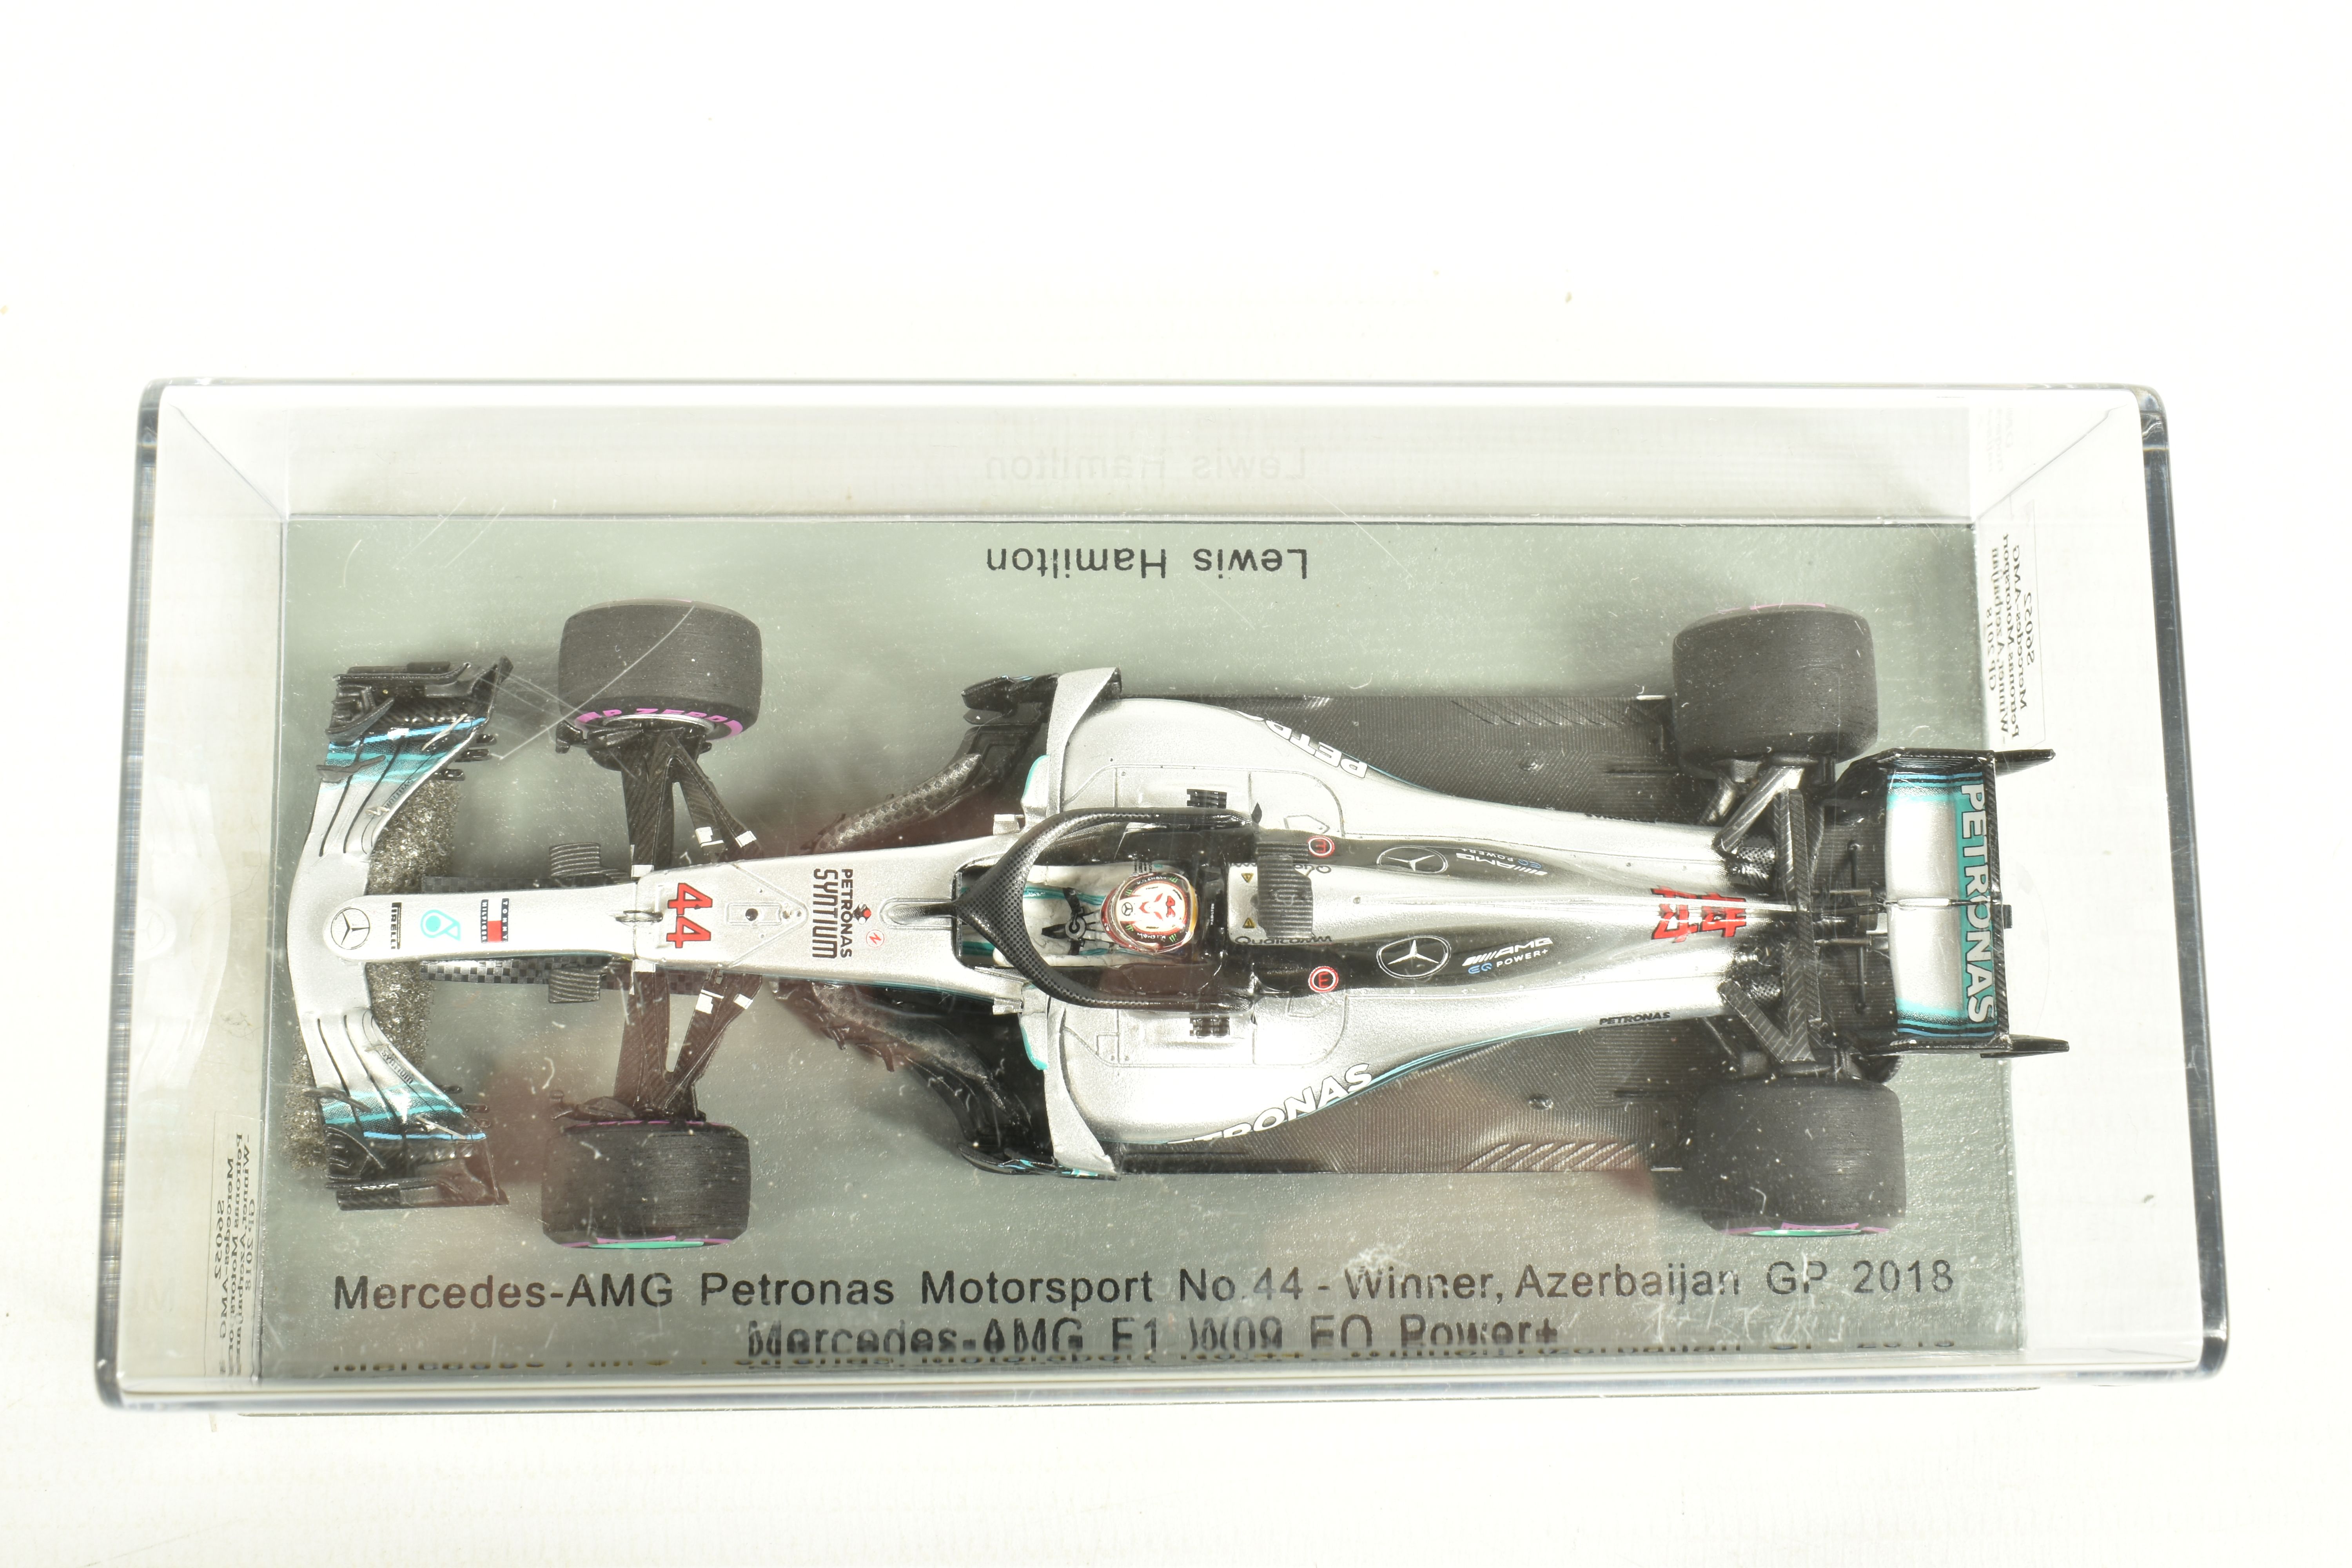 SIX SPARK 1.43 SCALE DIECAST MODELS, to include a Mercedes, AMG Mexican GP 2017, model no. S5054, - Image 5 of 13